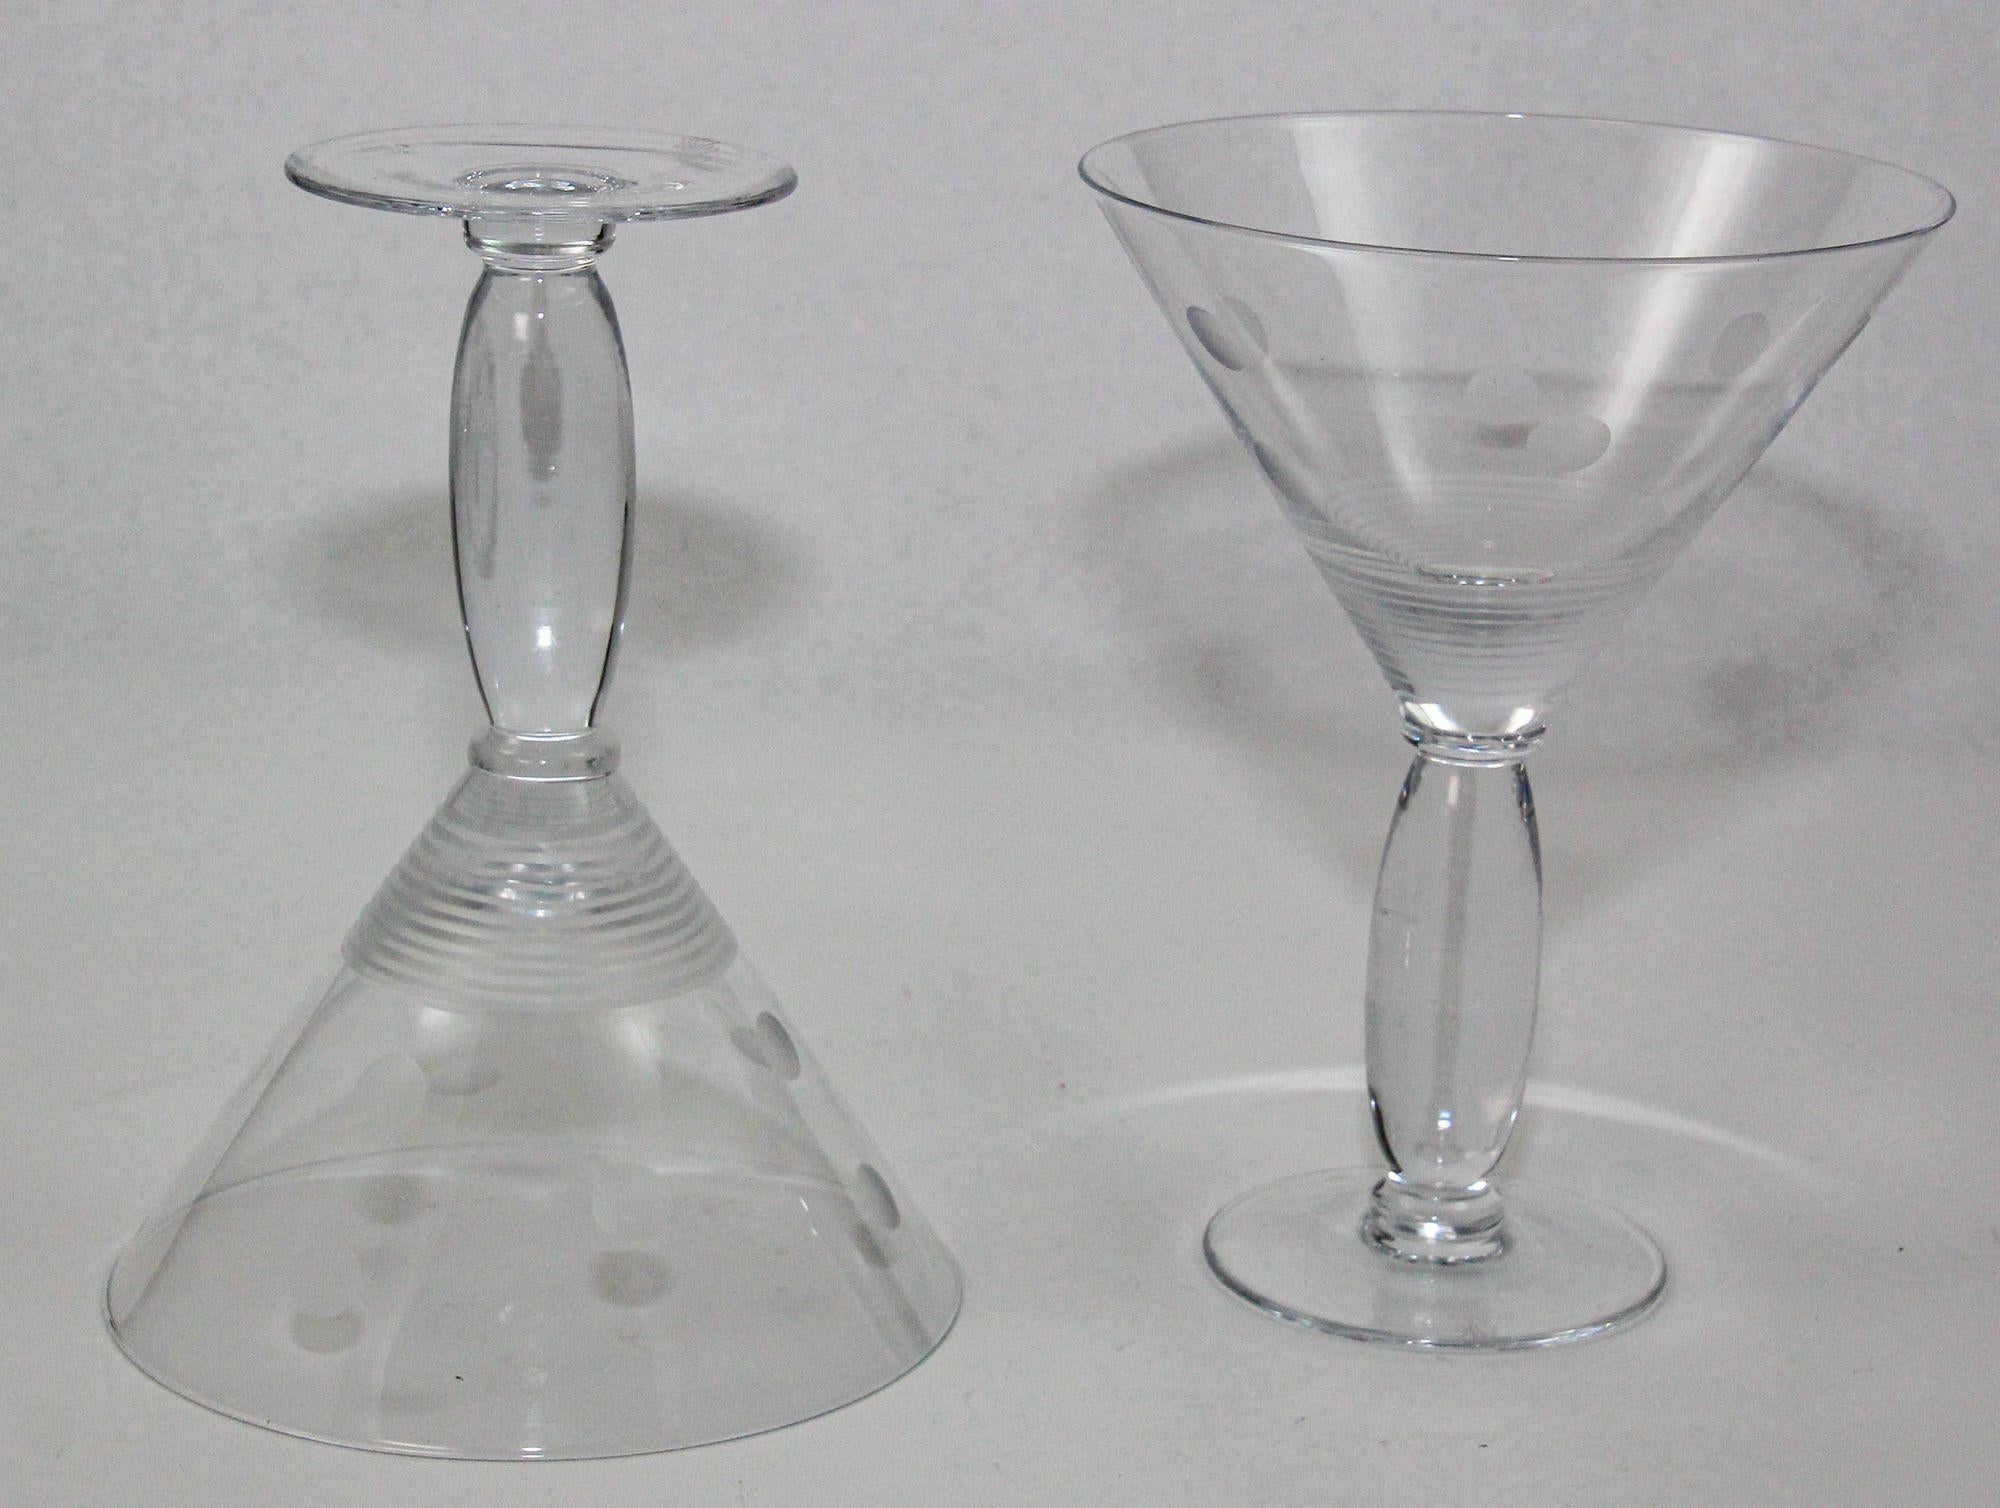 Hand-Crafted ROYAL DOULTON Martini Crystal Etched Glasses Set of 2 Vintage Cocktail Barware For Sale